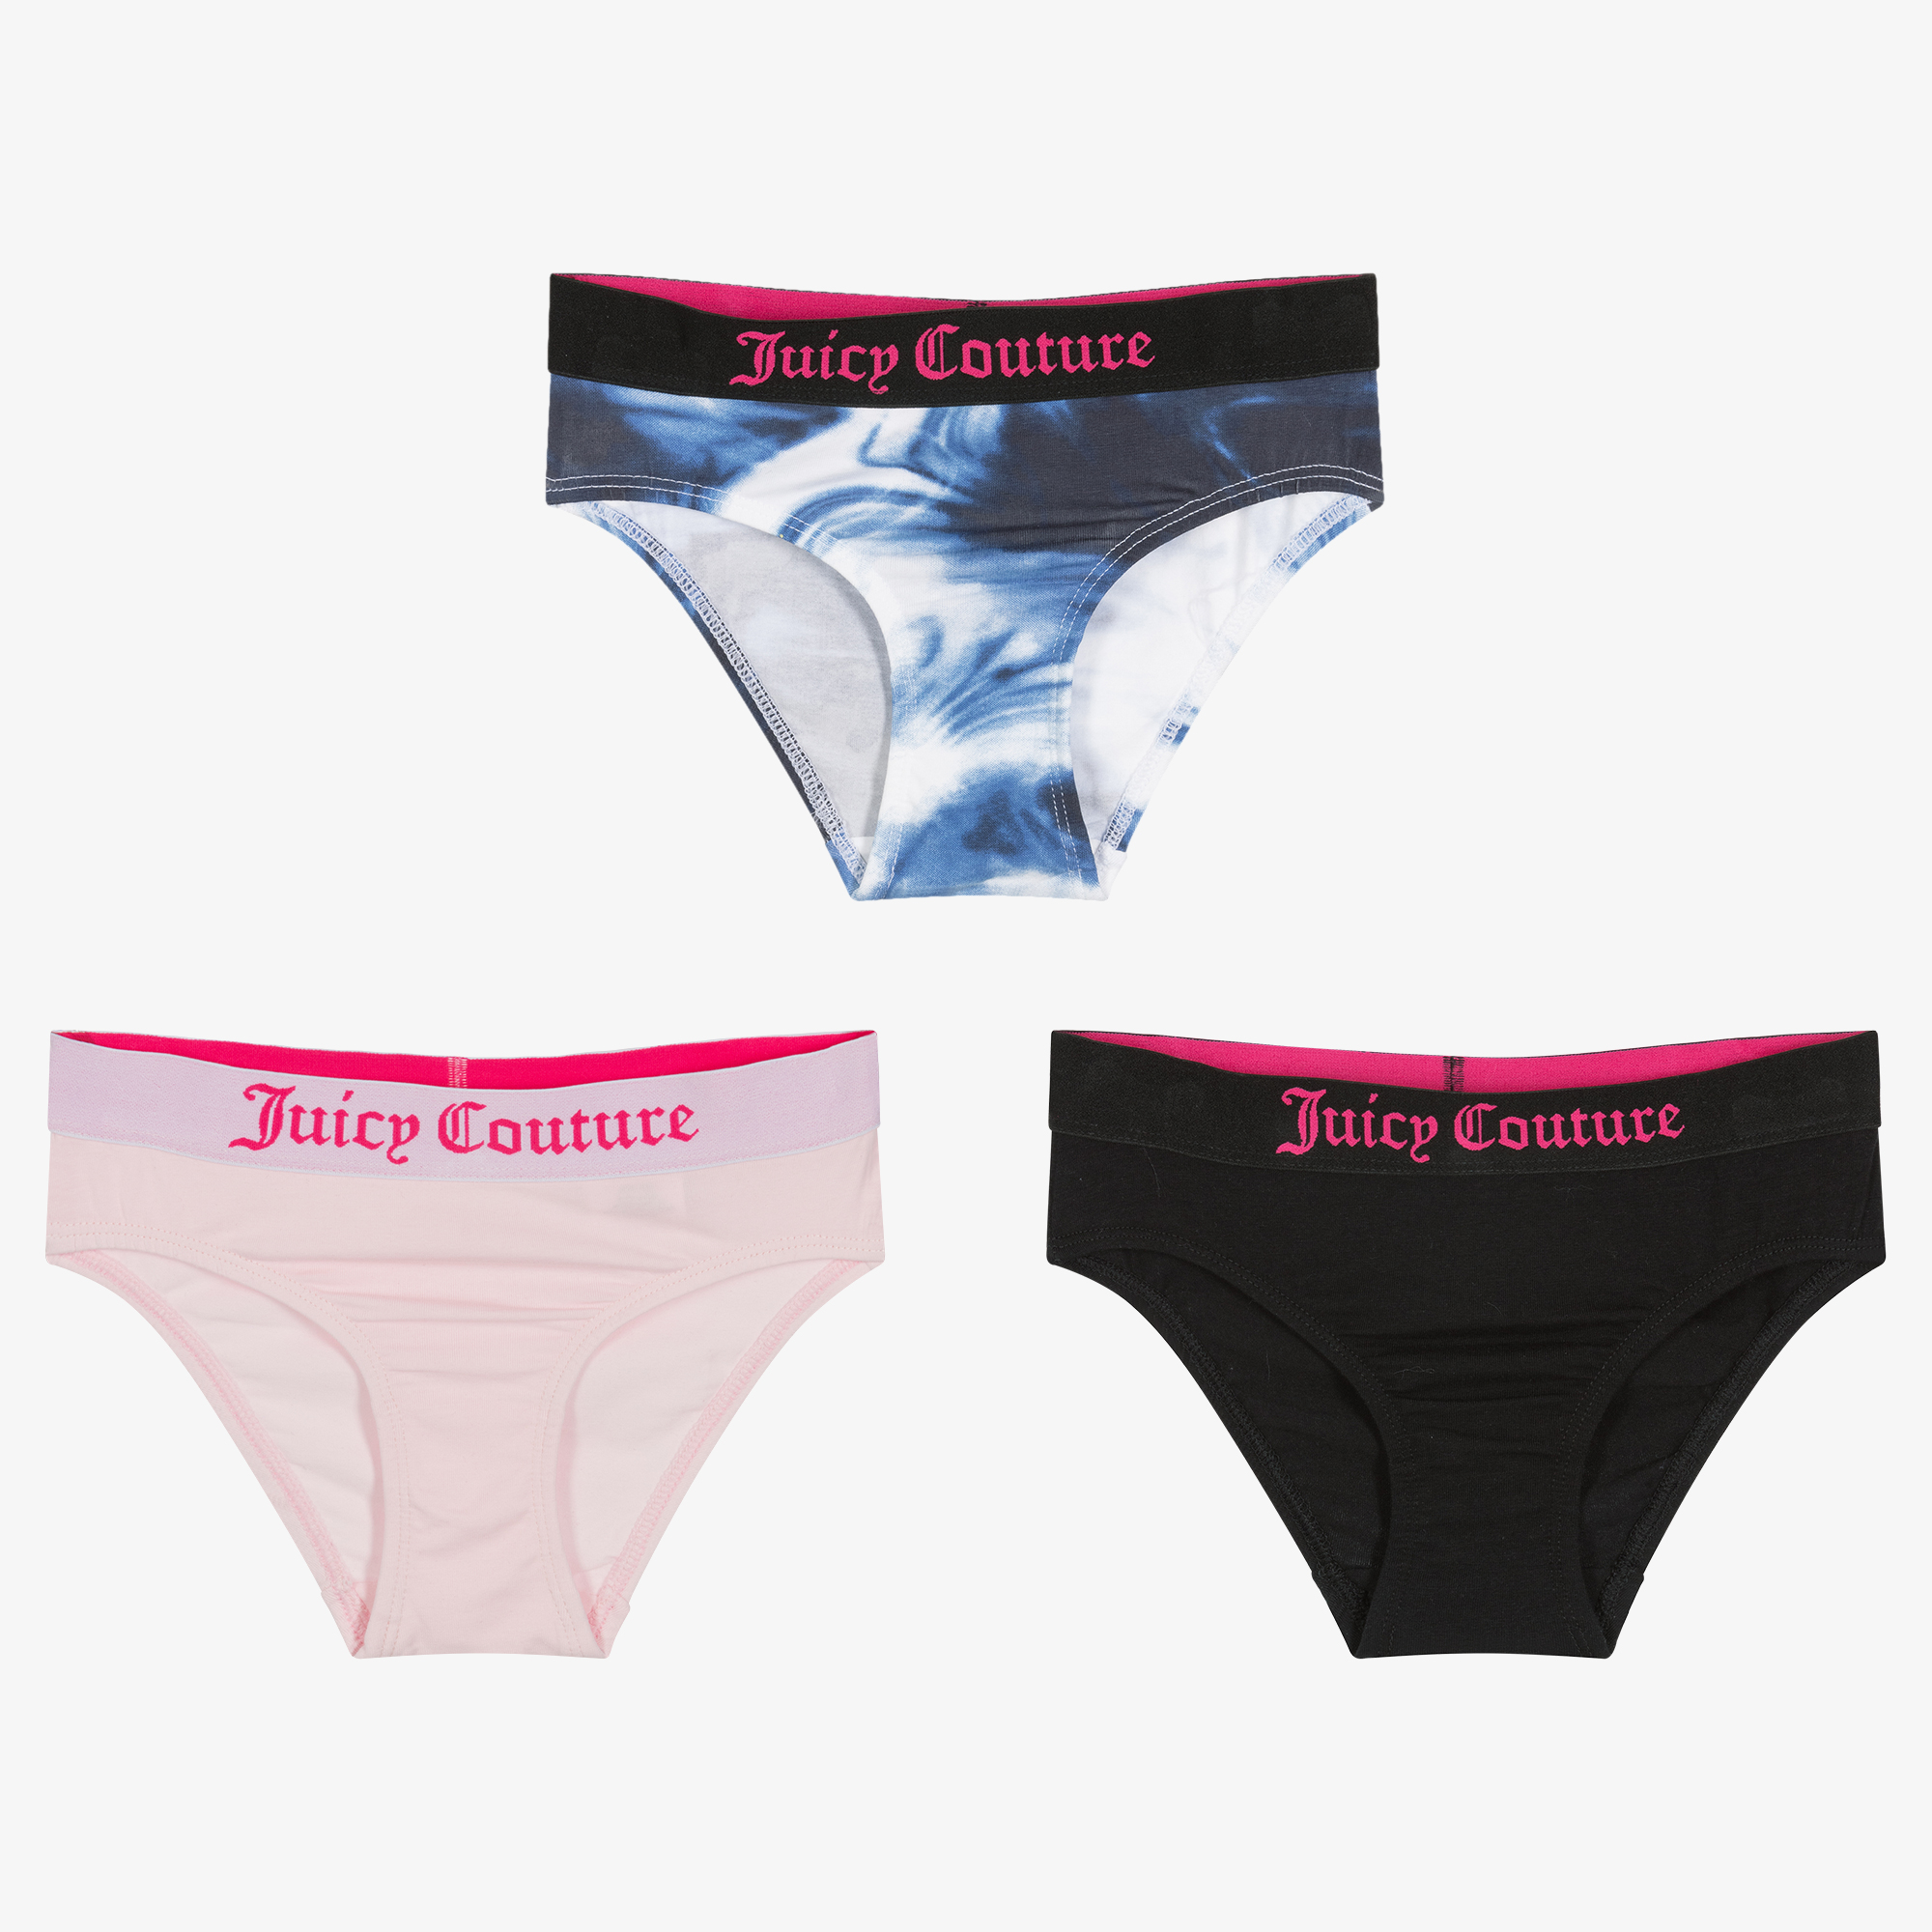 Juicy Couture - Girls Cotton Knickers (3 Pack)